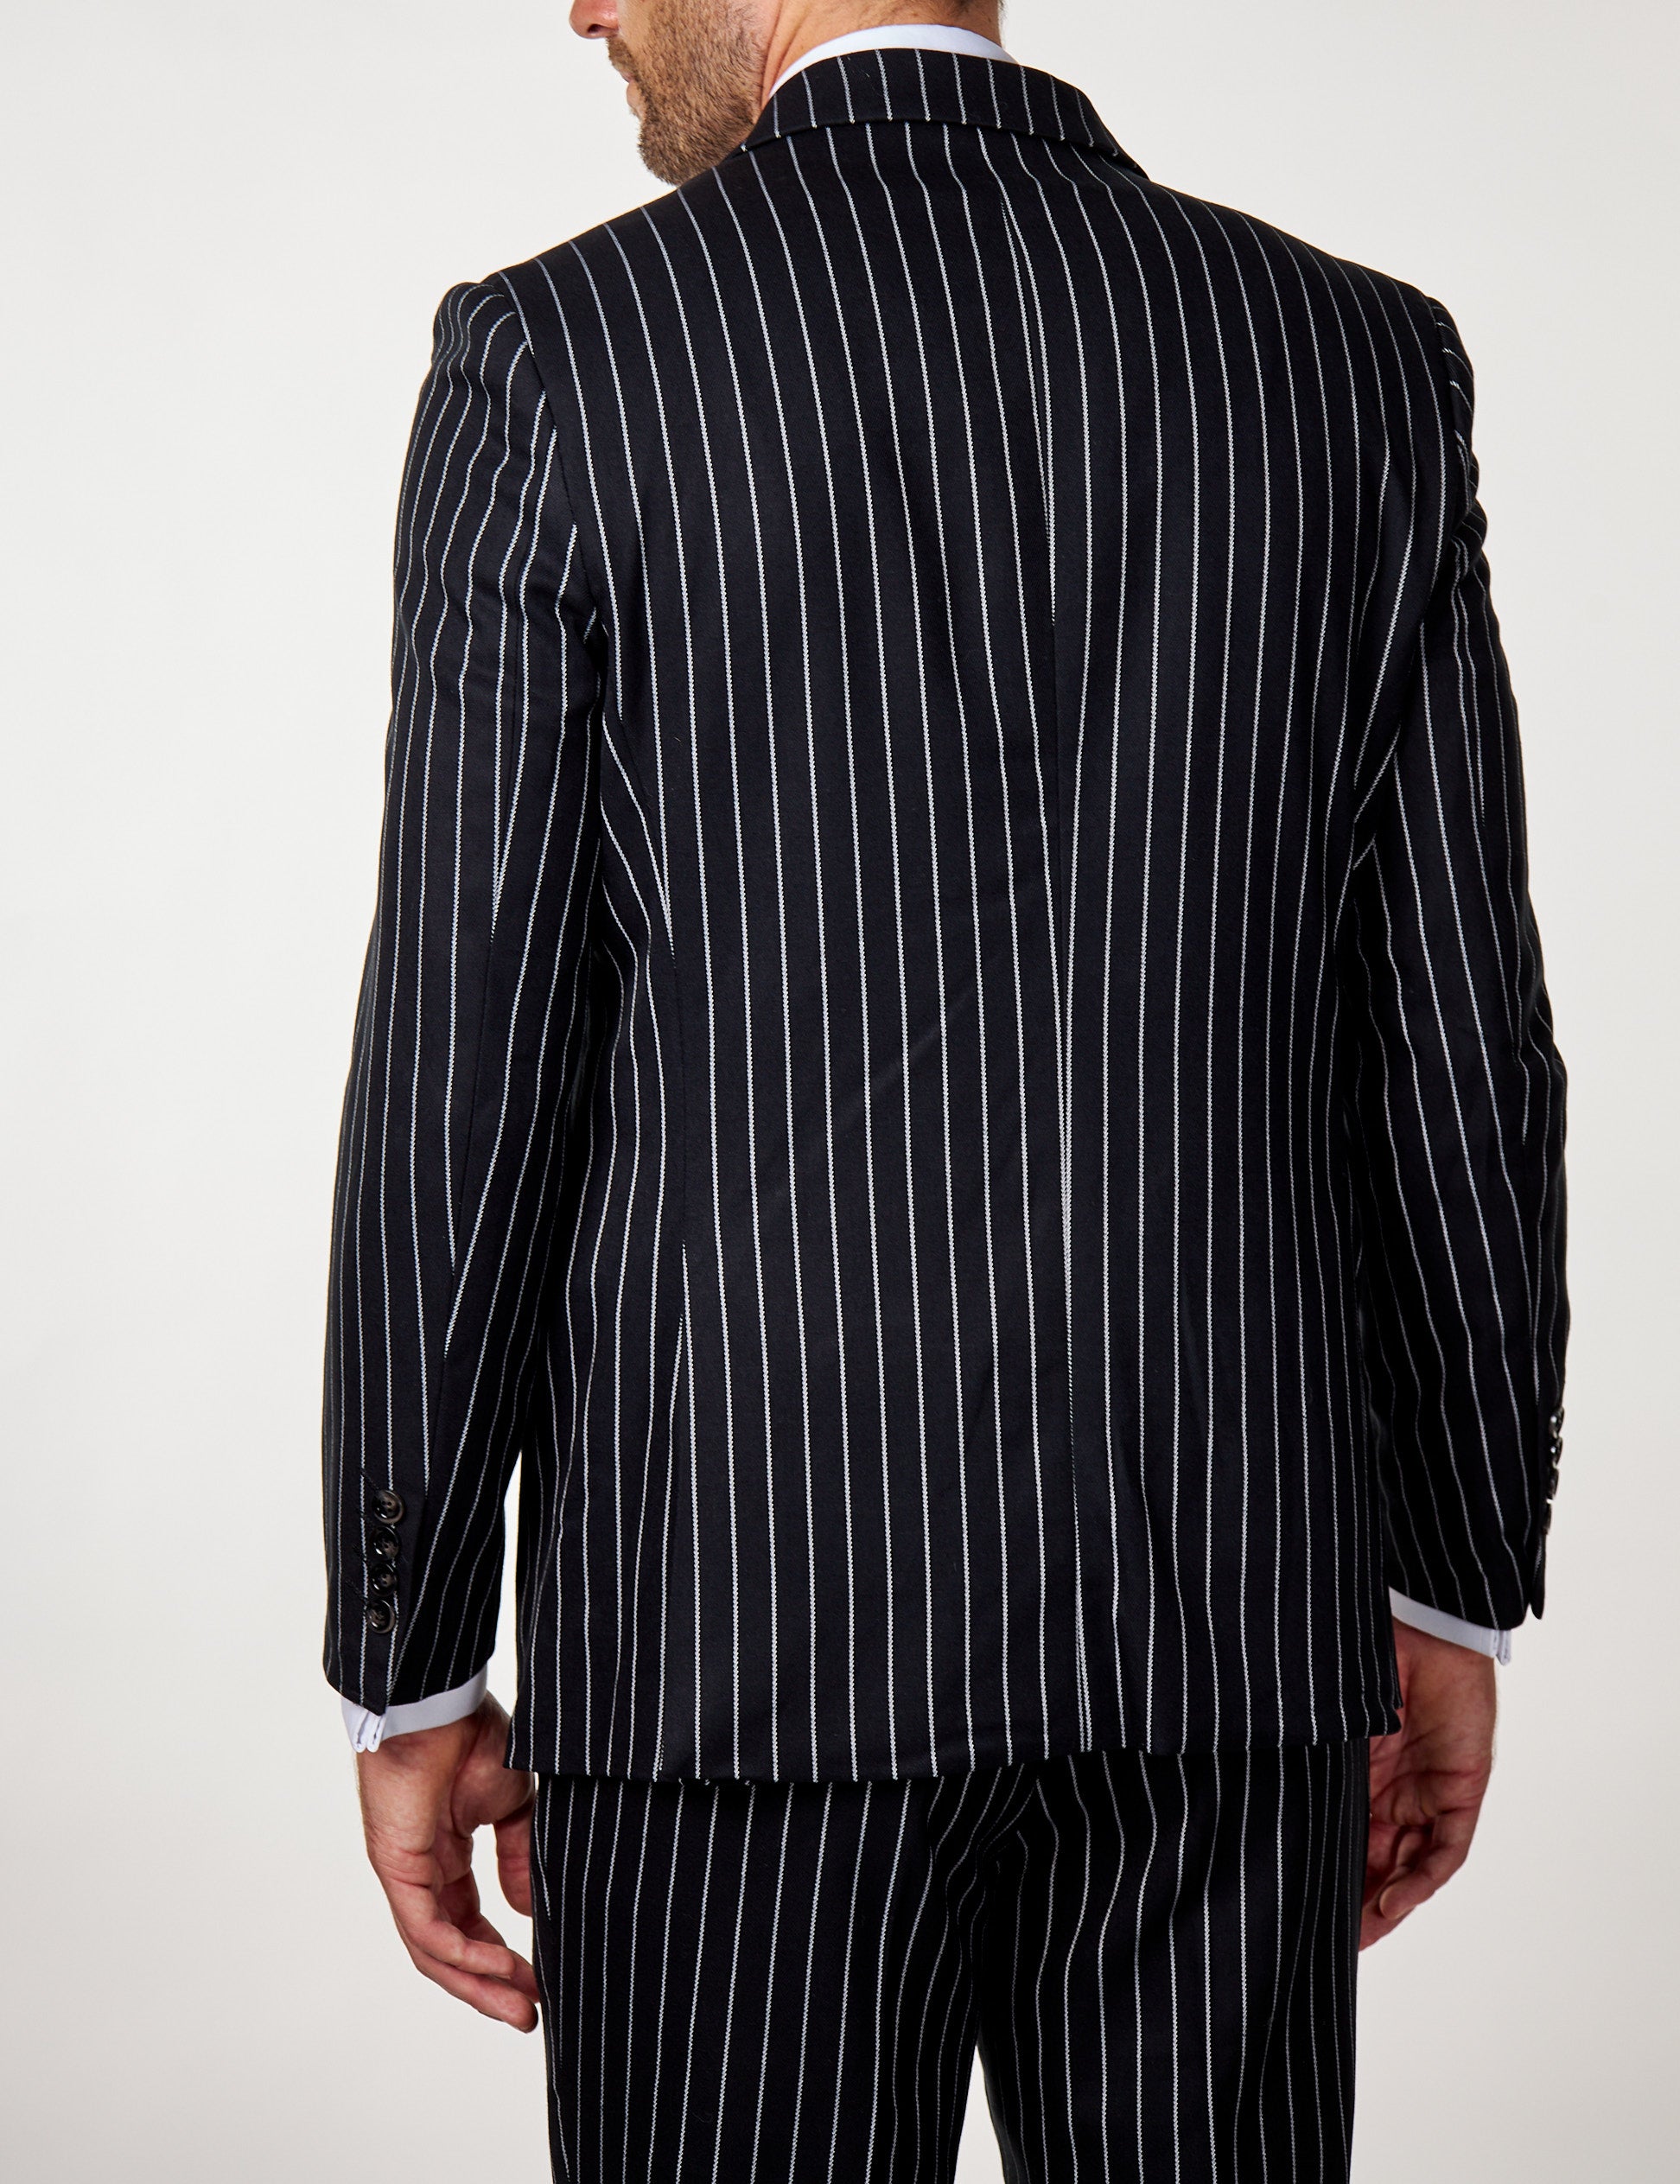 ALFRED - Black Chalk Stripe Double Breasted Suit